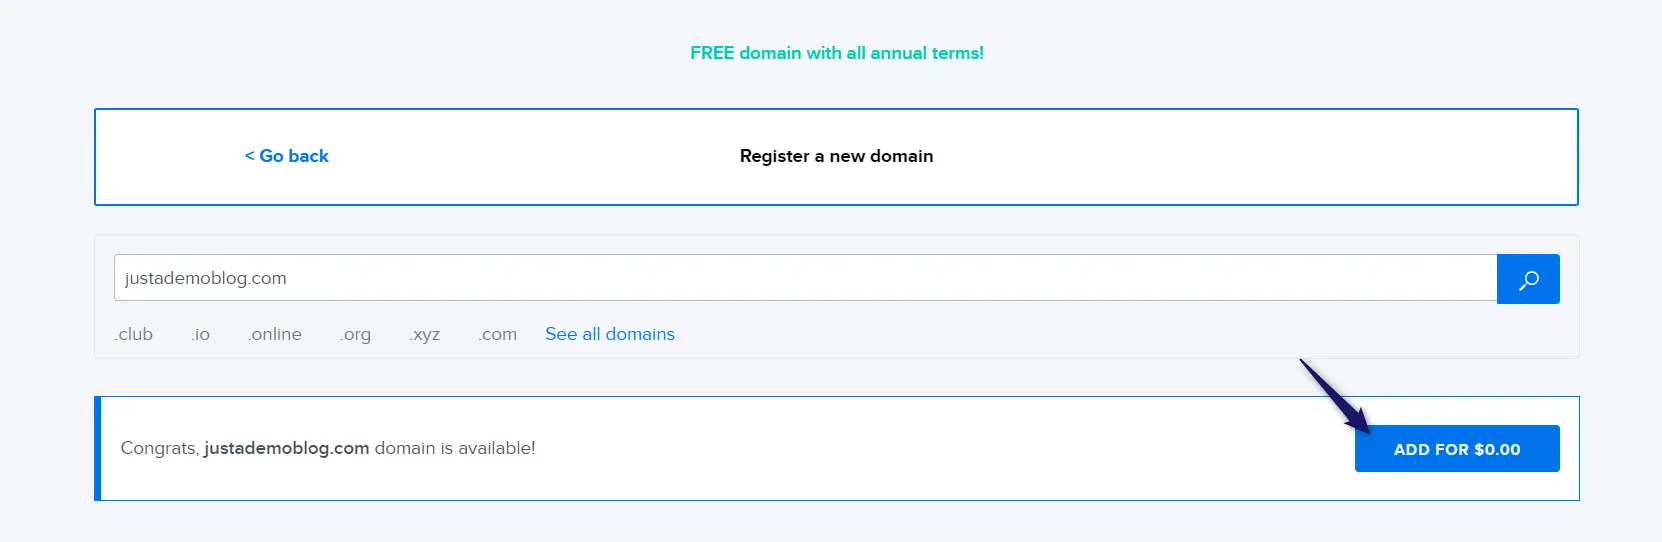 Add dreamhost domain to cart